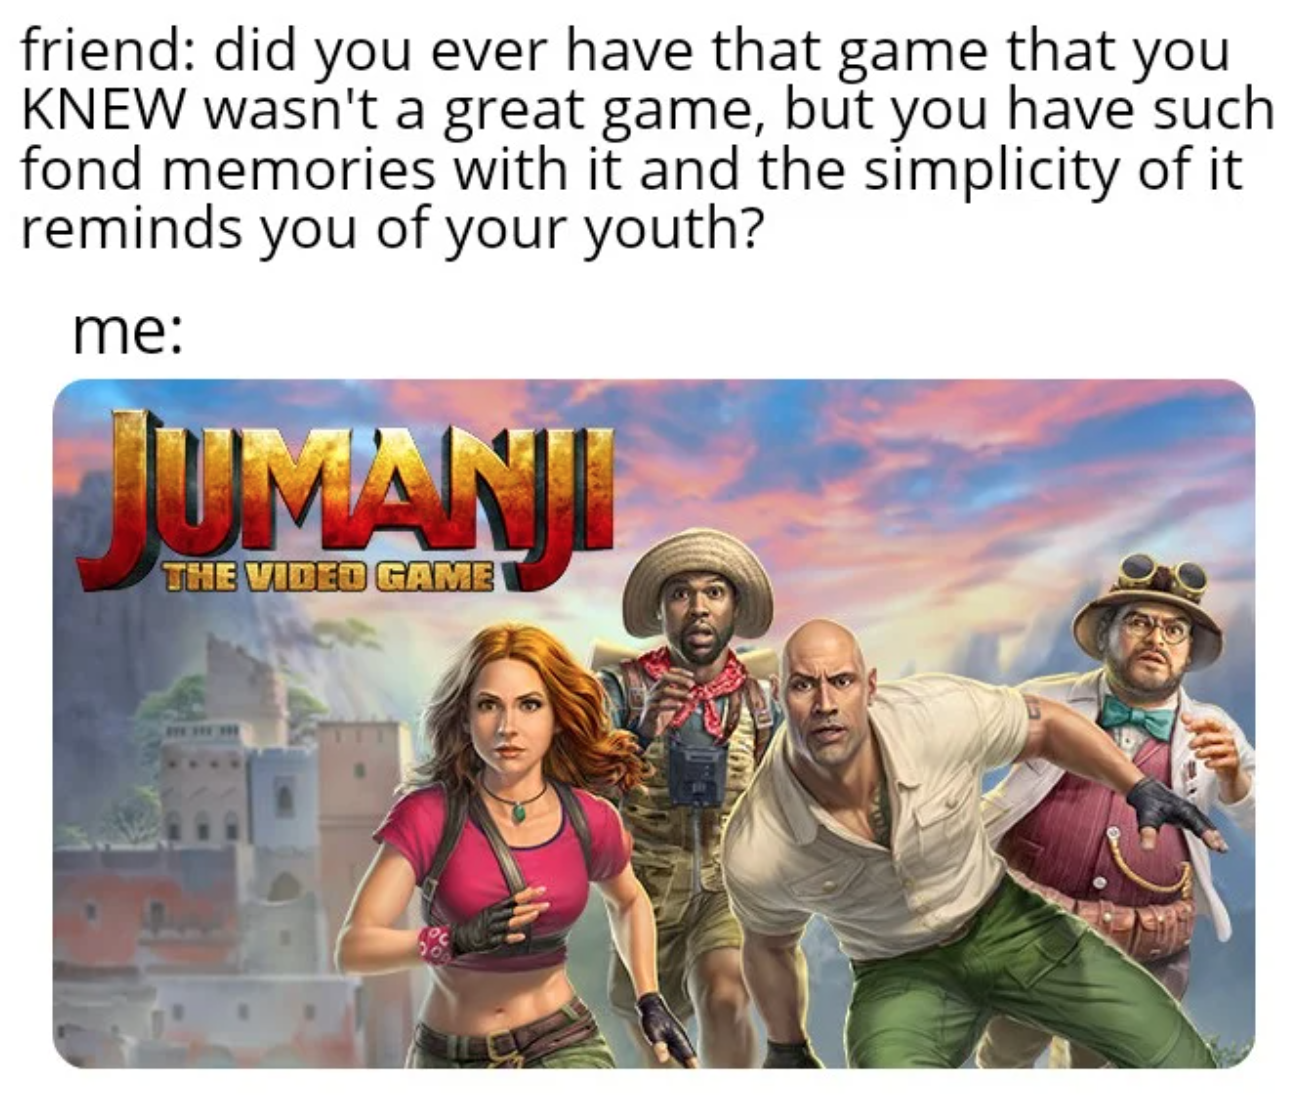 funny gaming memes - jumanji the video game - friend did you ever have that game that you Knew wasn't a great game, but you have such fond memories with it and the simplicity of it reminds you of your youth? me Jumani The Video Game Uurin